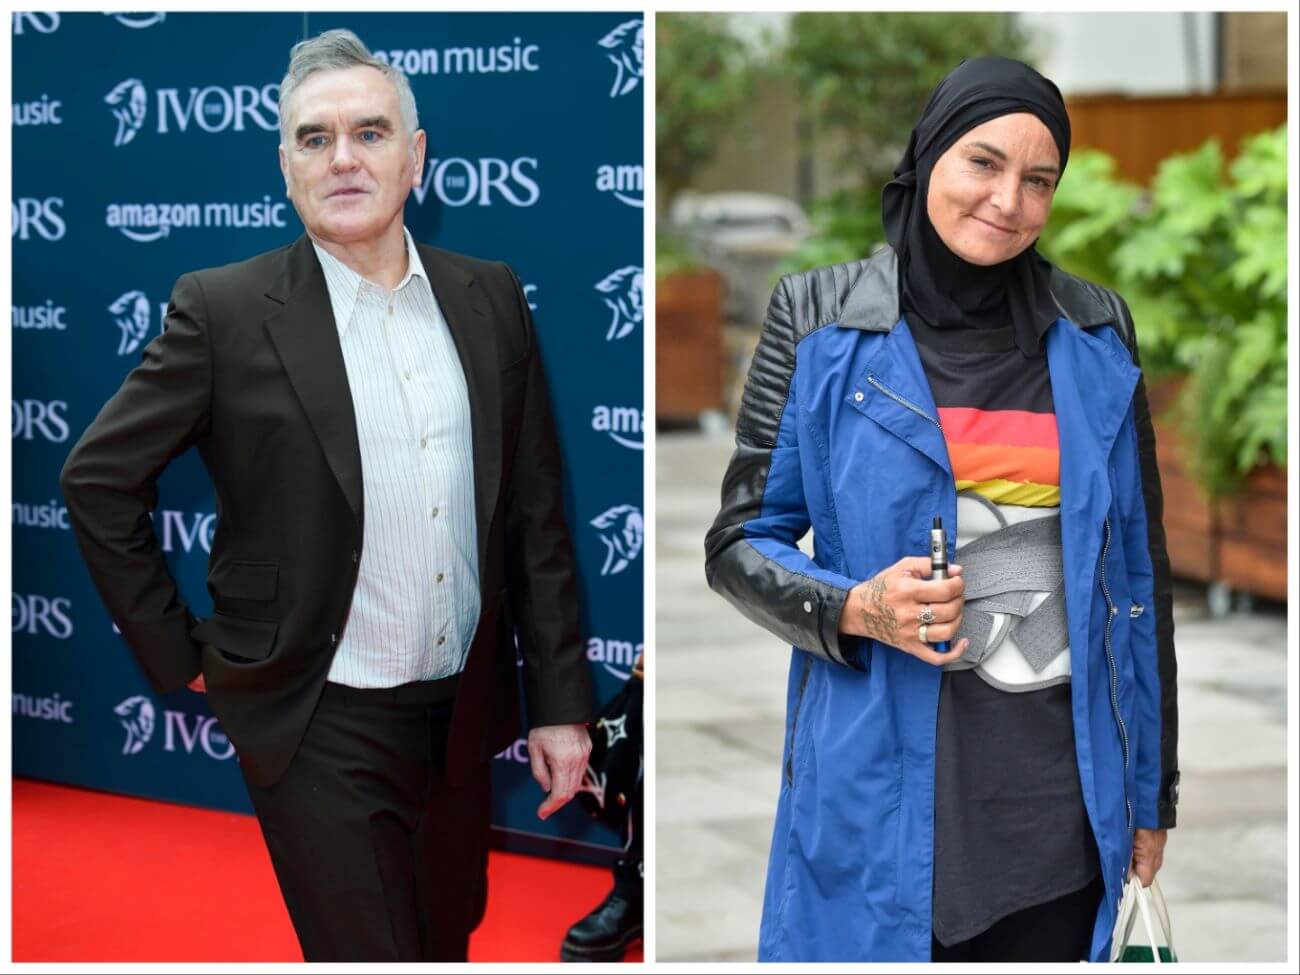 Morrissey wears a black suit and walks on the red carpet. Sinead O'Connor wears a hijab, black shirt, and long blue coat while standing outdoors.